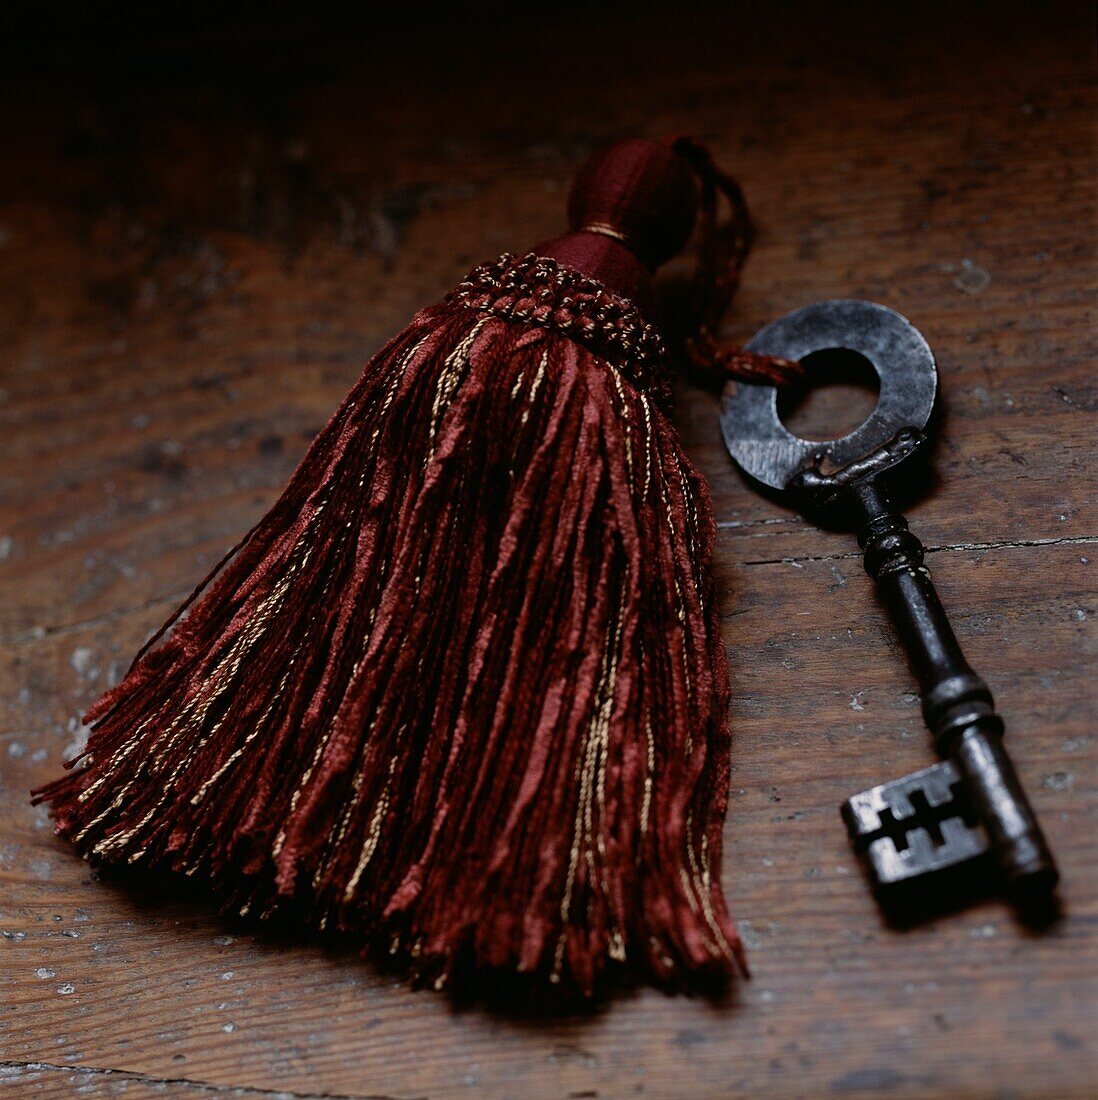 Red tassel attached to a vintage key